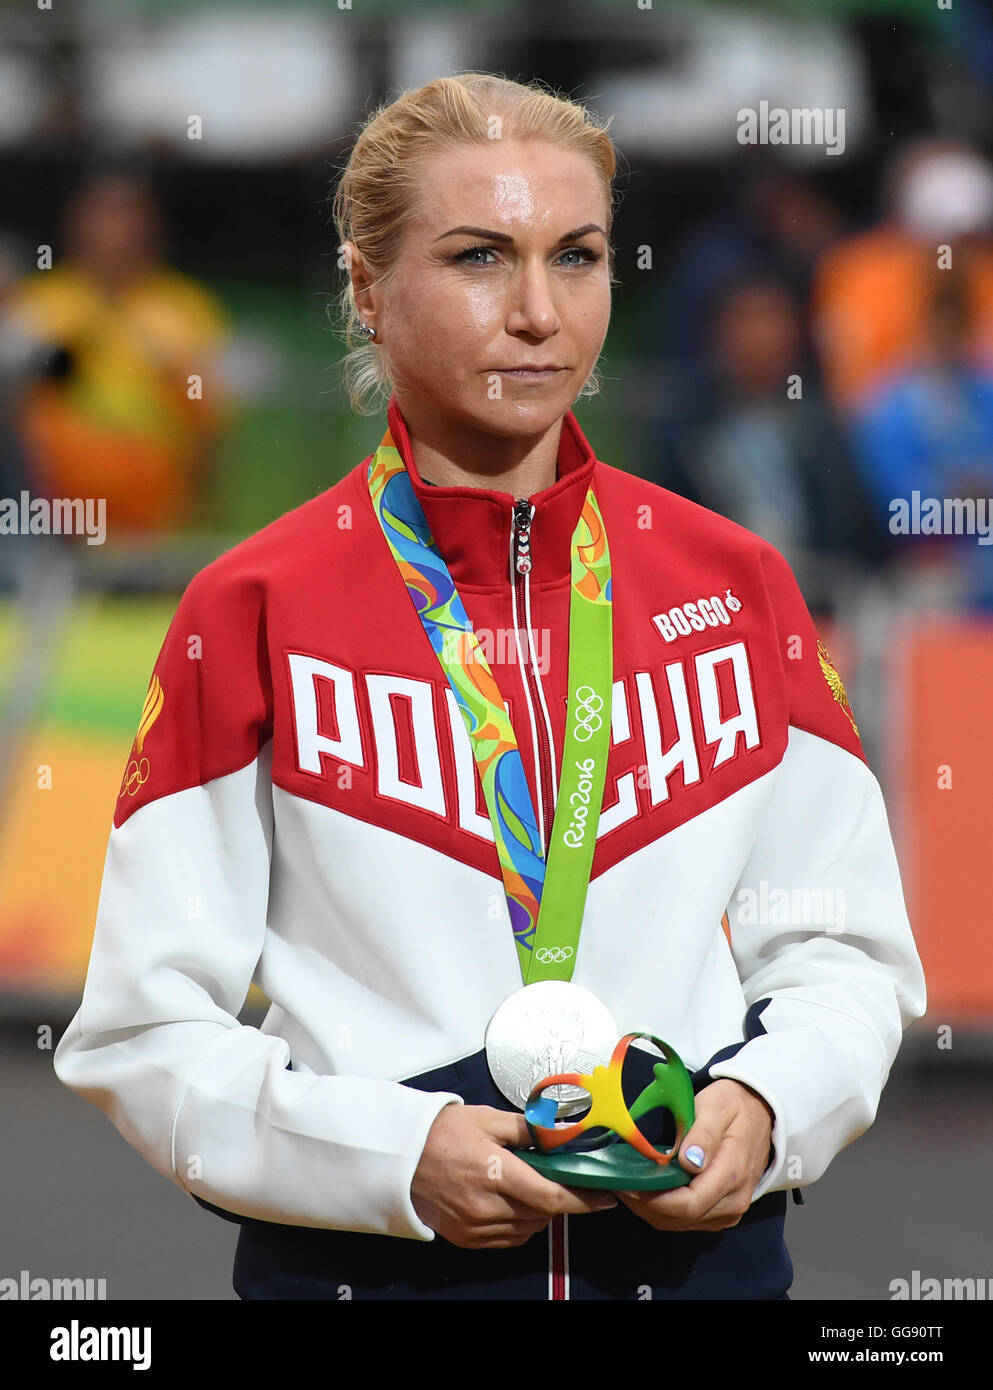 Rio de Janeiro, Brazil. 10th Aug, 2016. Second placed Olga Zabelinskaya of Russia celebrates on the podium after the women's Individual Time Trial of the Rio 2016 Olympic Games Road Cycling events at Pontal in Rio de Janeiro, Brazil, 10 August 2016. APhoto: Soeren Stache/dpa/Alamy Live News Stock Photo